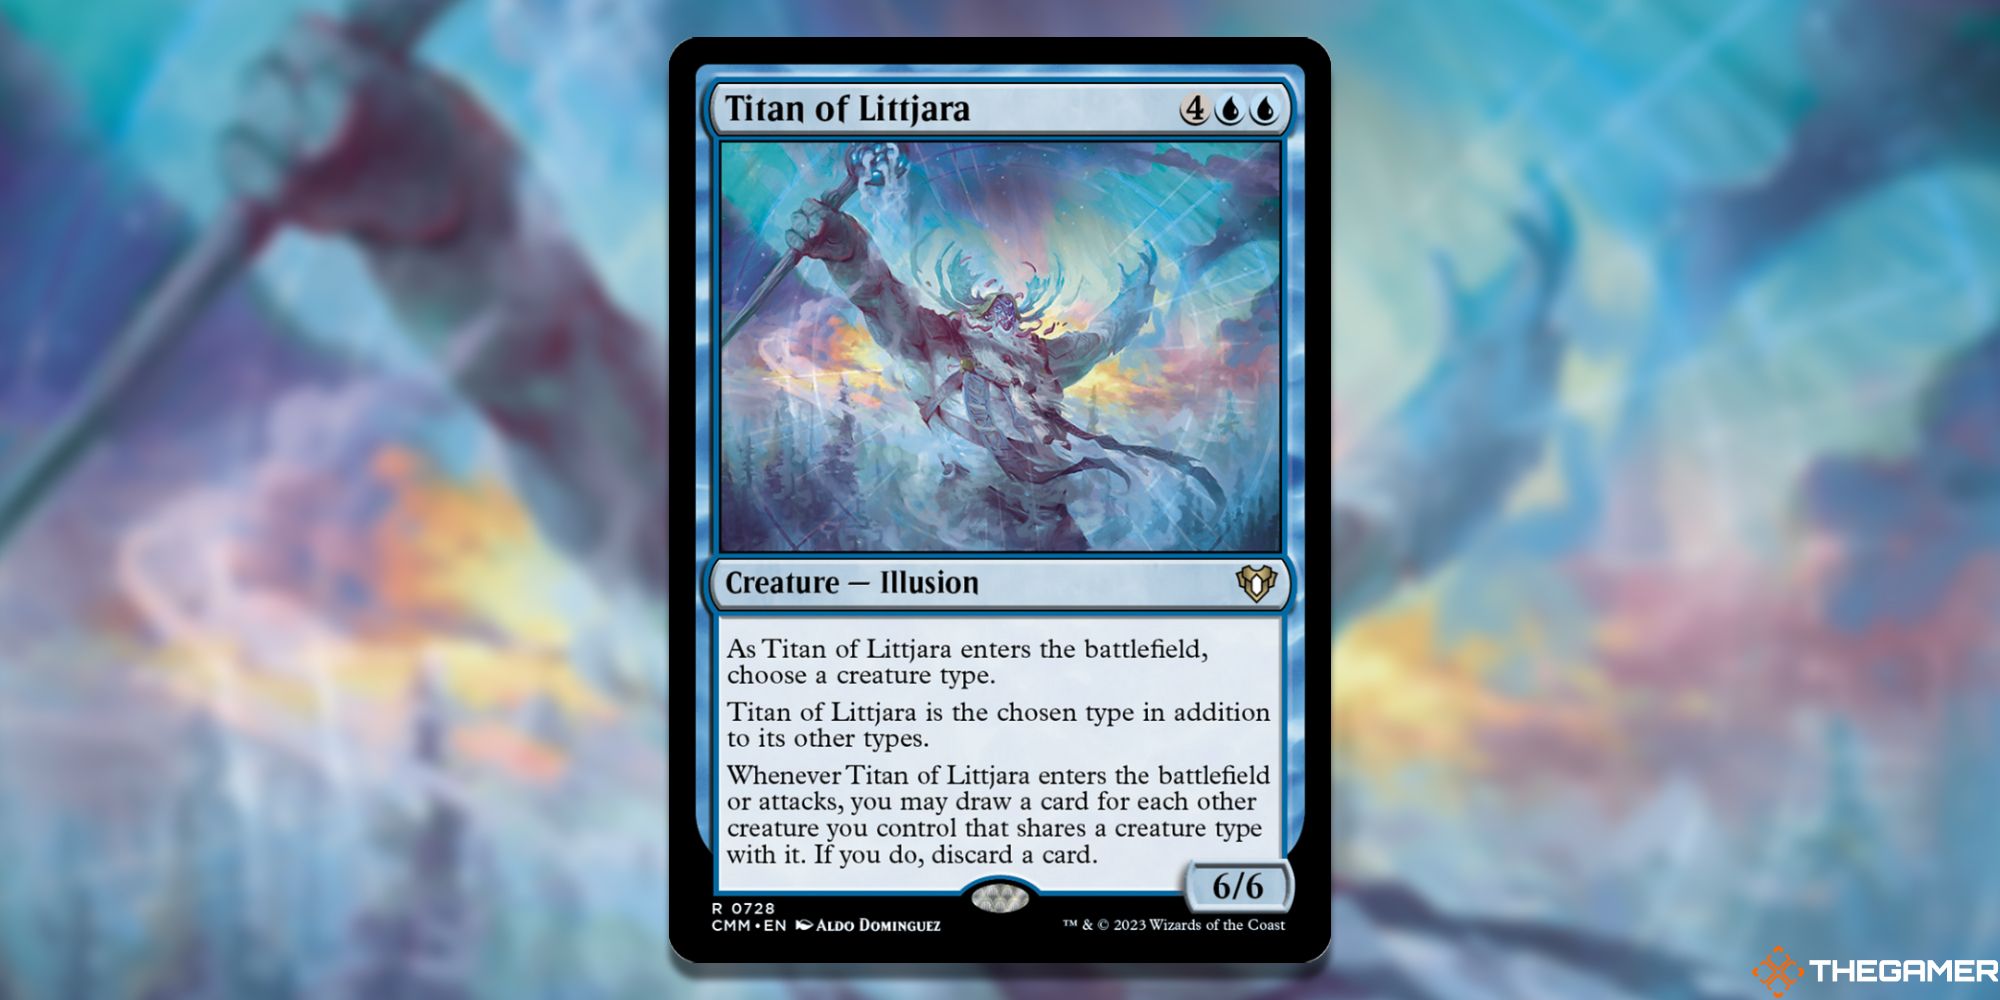 Image of the Titan of Littjara card in Magic: The Gathering, with art by Aldo Dominguez